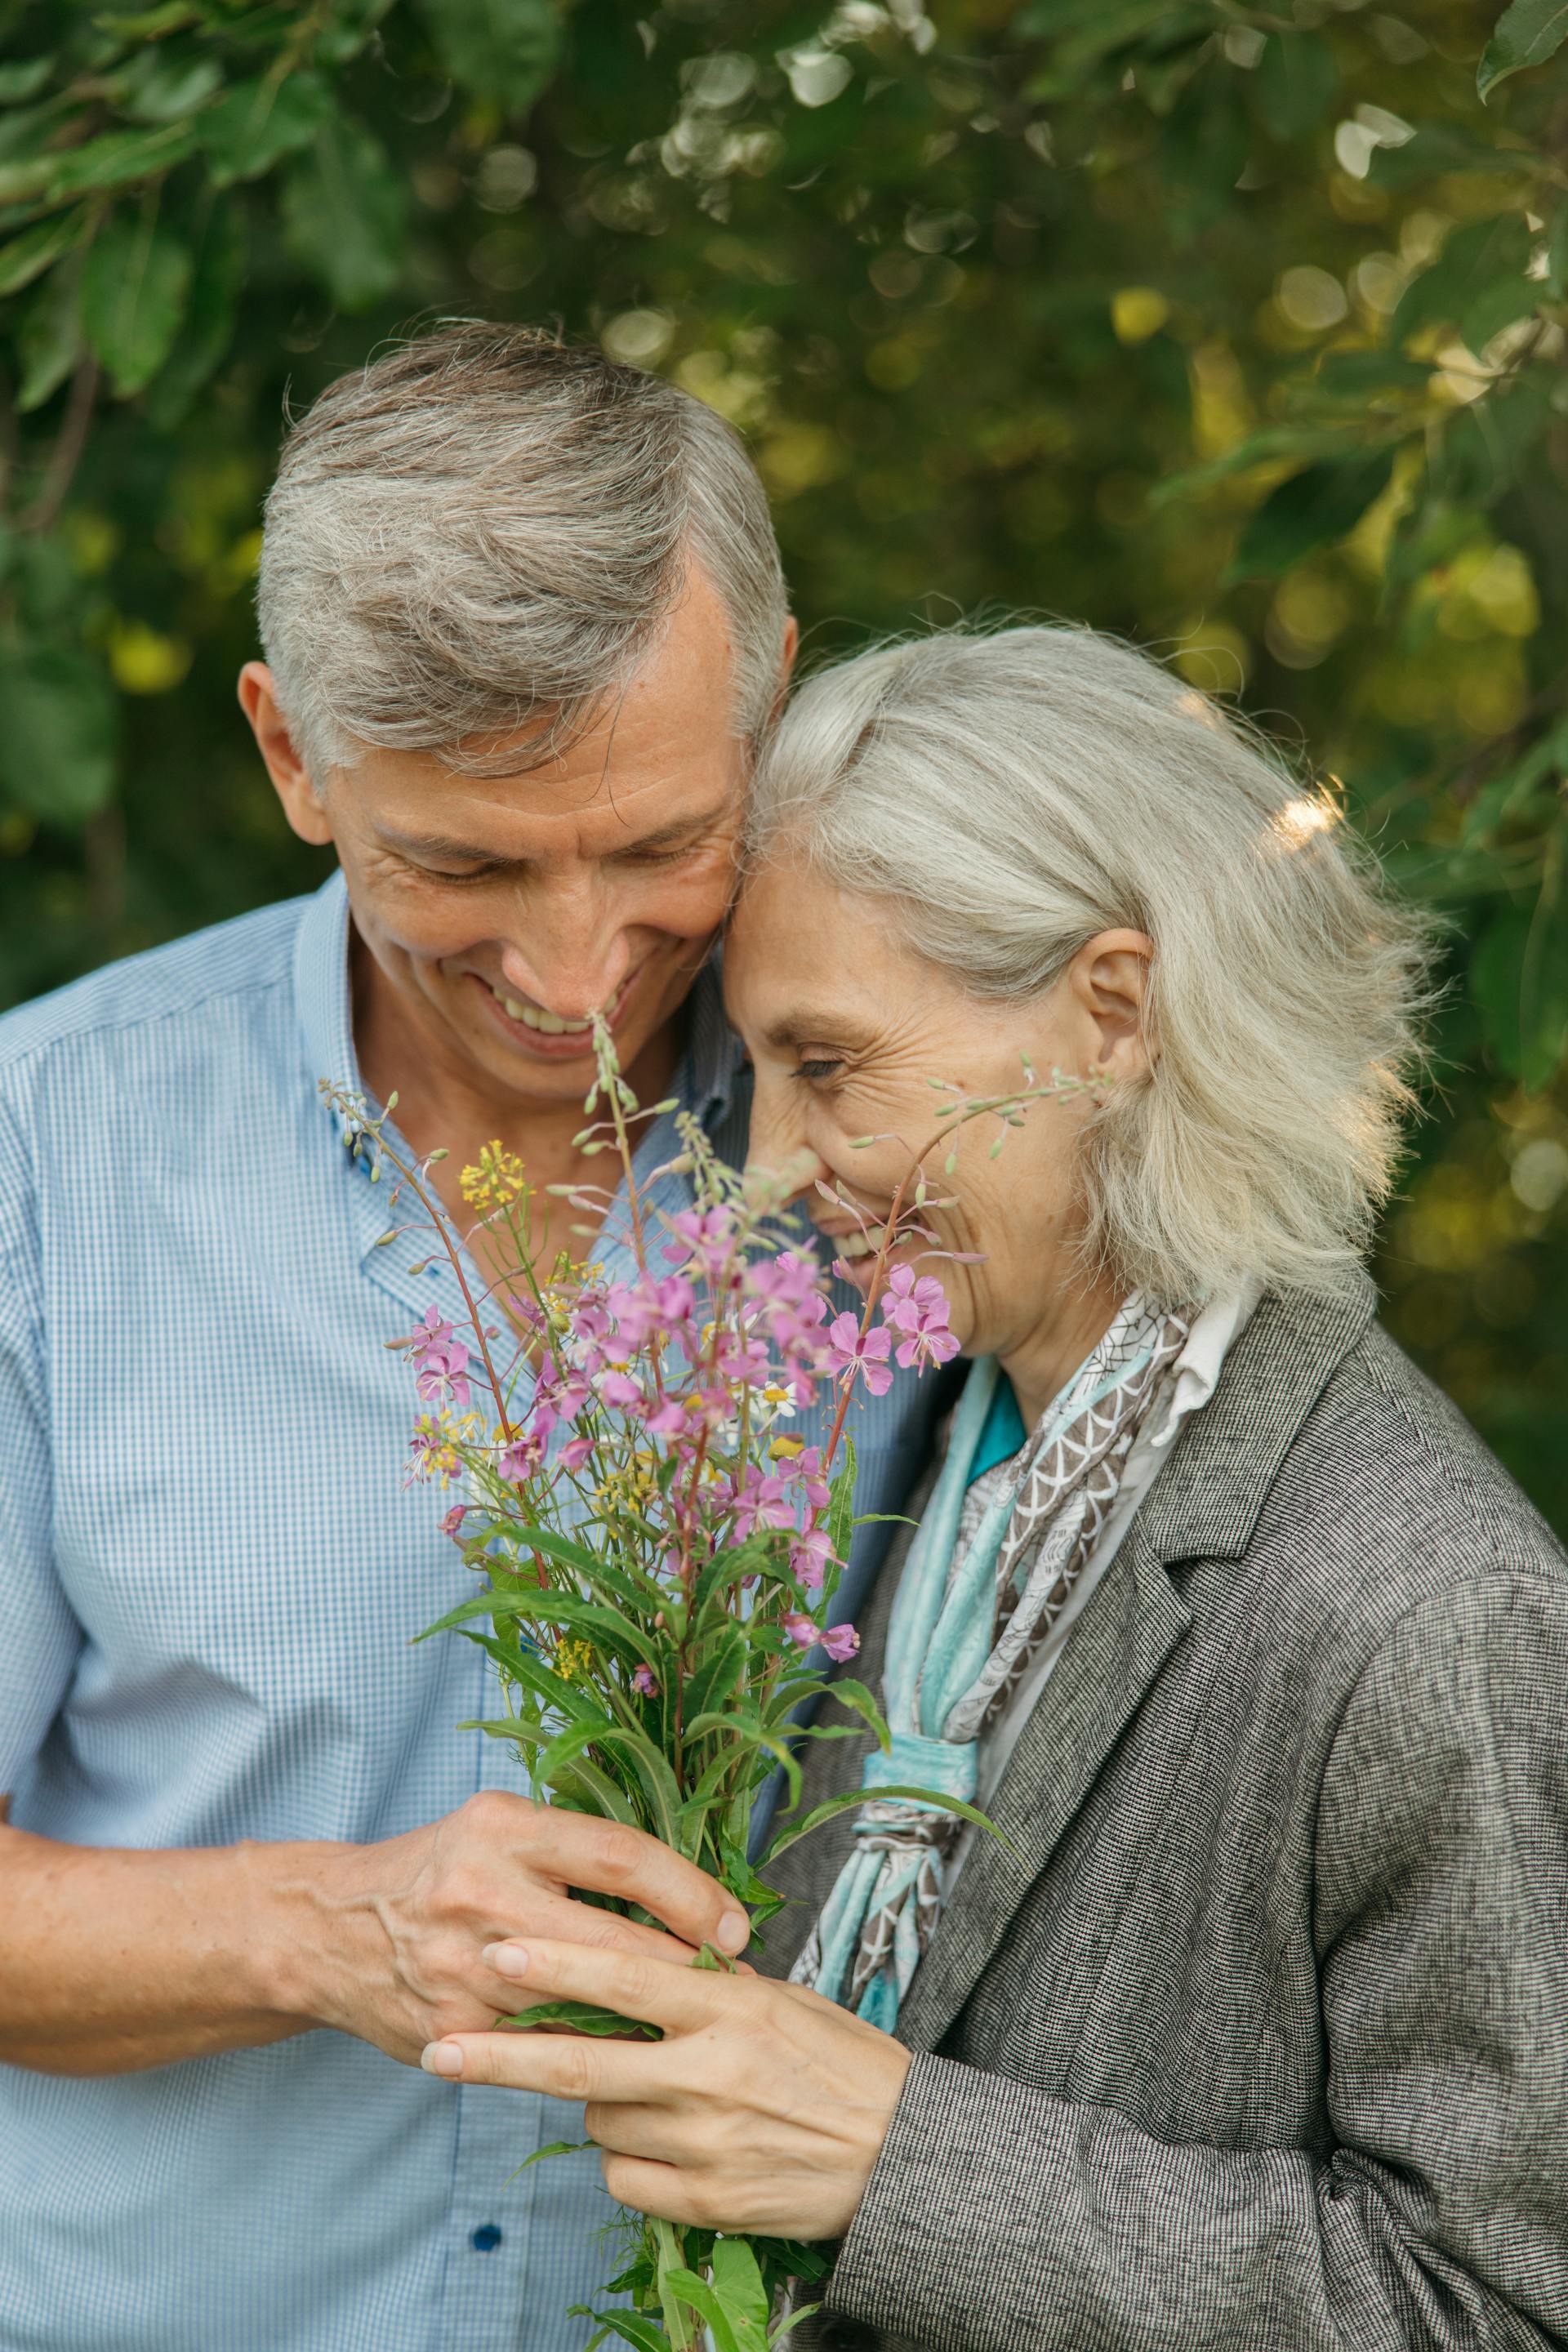 A close-up shot on an elderly couple holding flowers | Source: Pexels